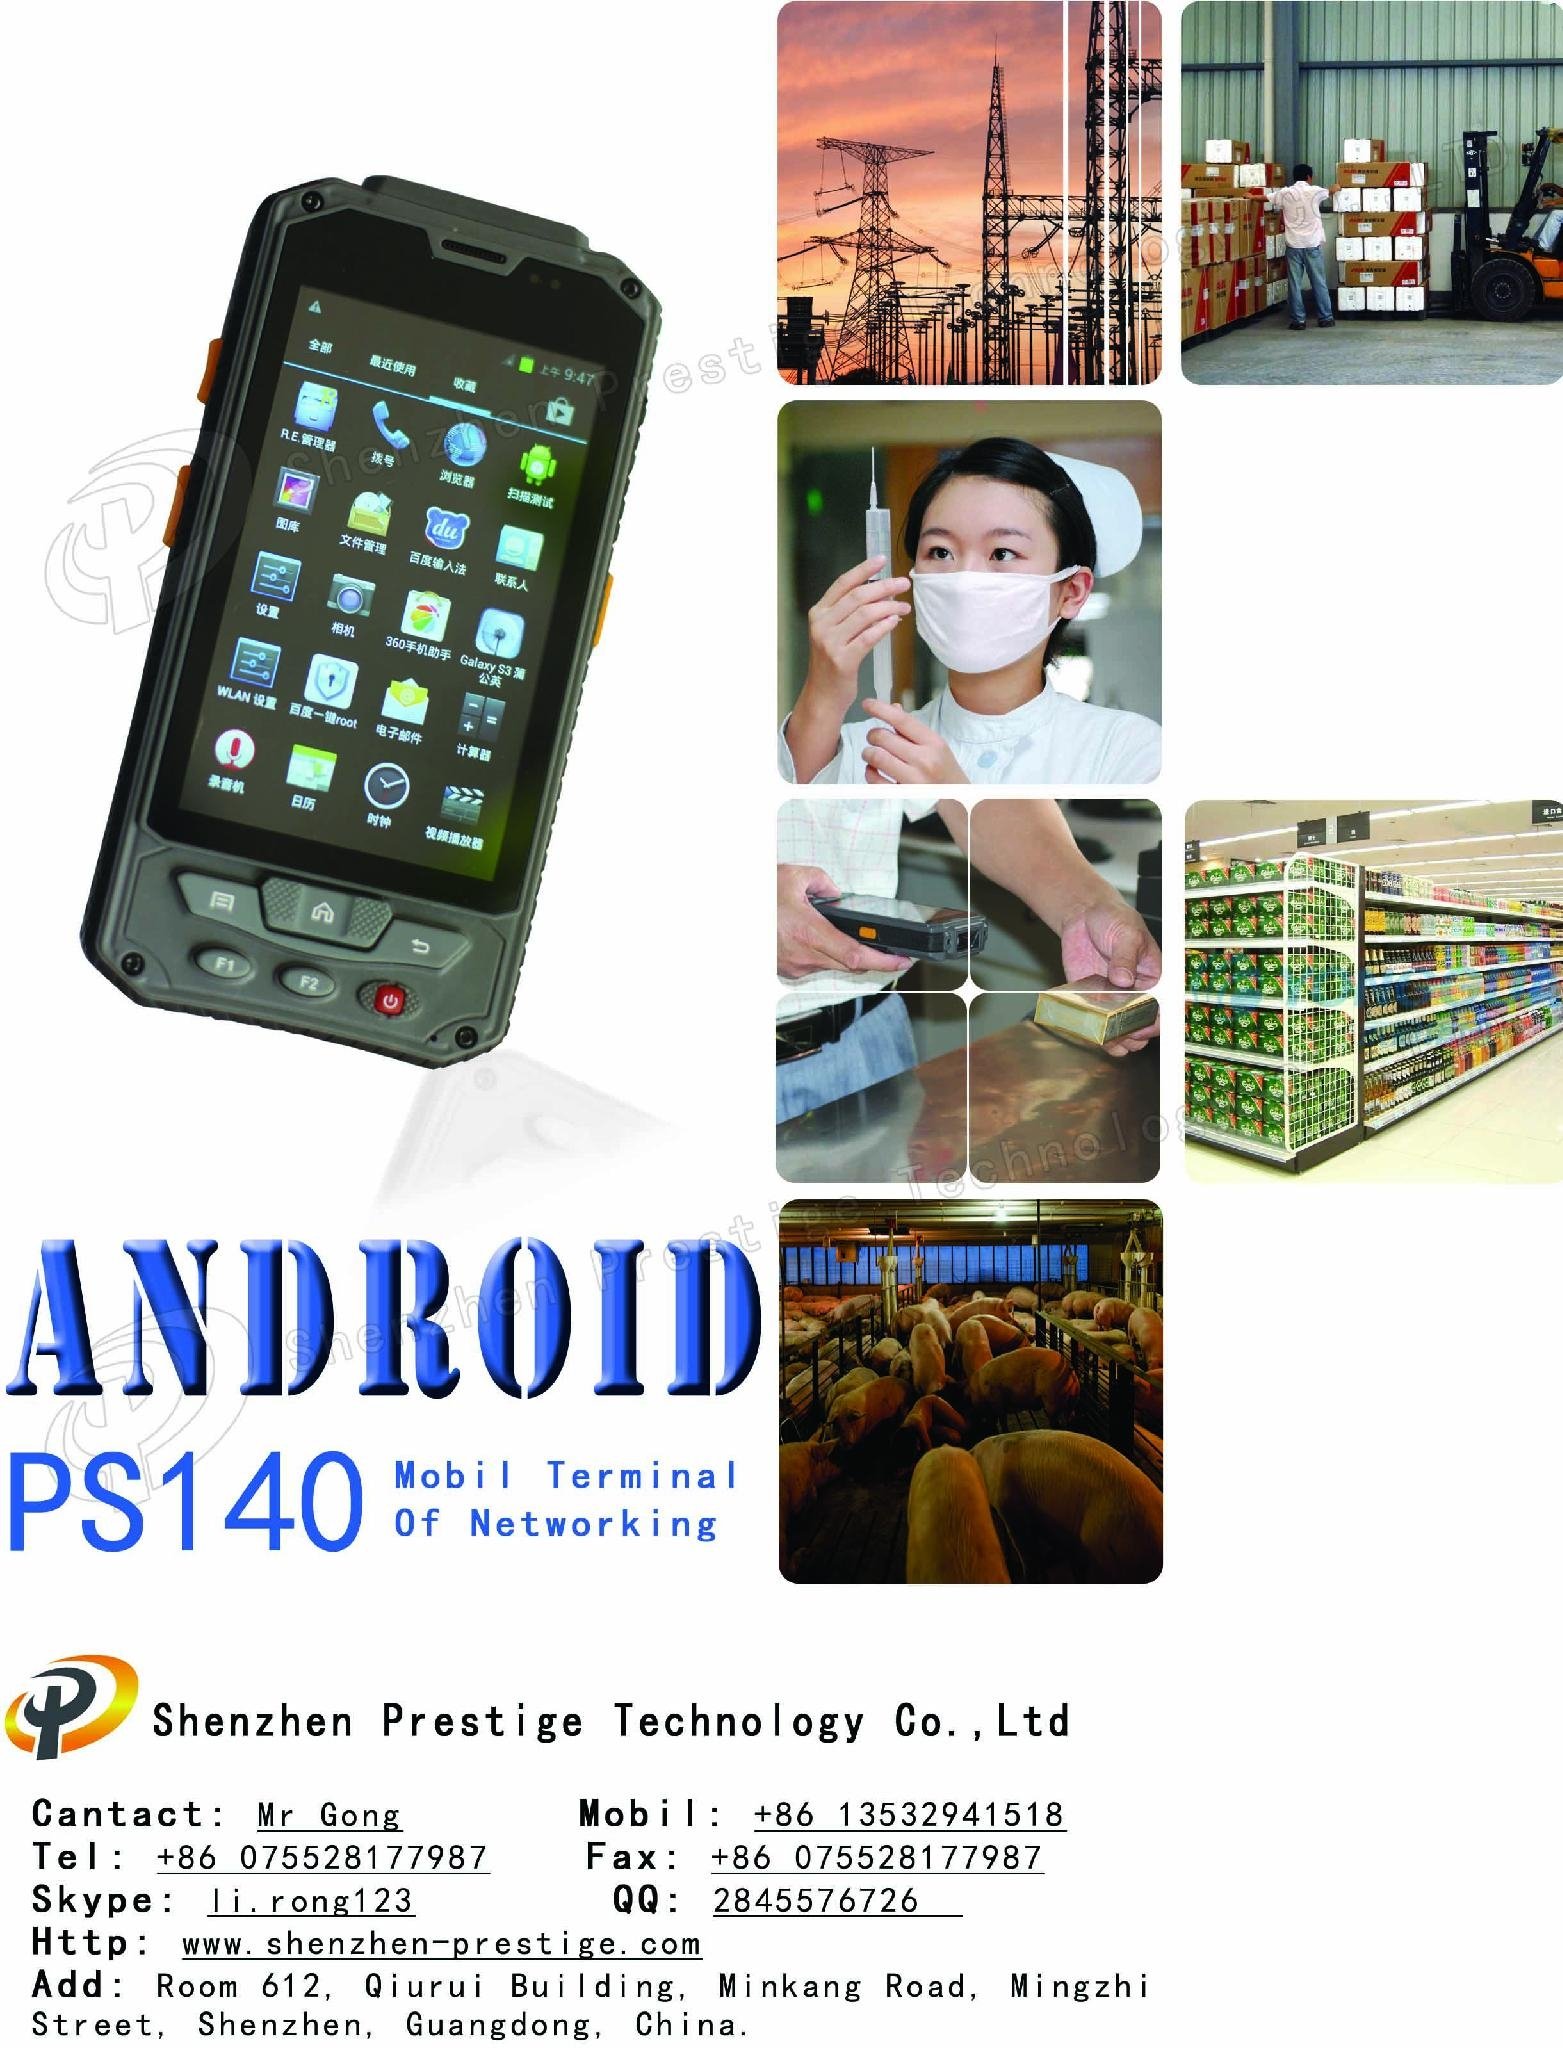 PS-140f rAndroid r   ed Handheld terminal PDA with 2D barcode scanner 5